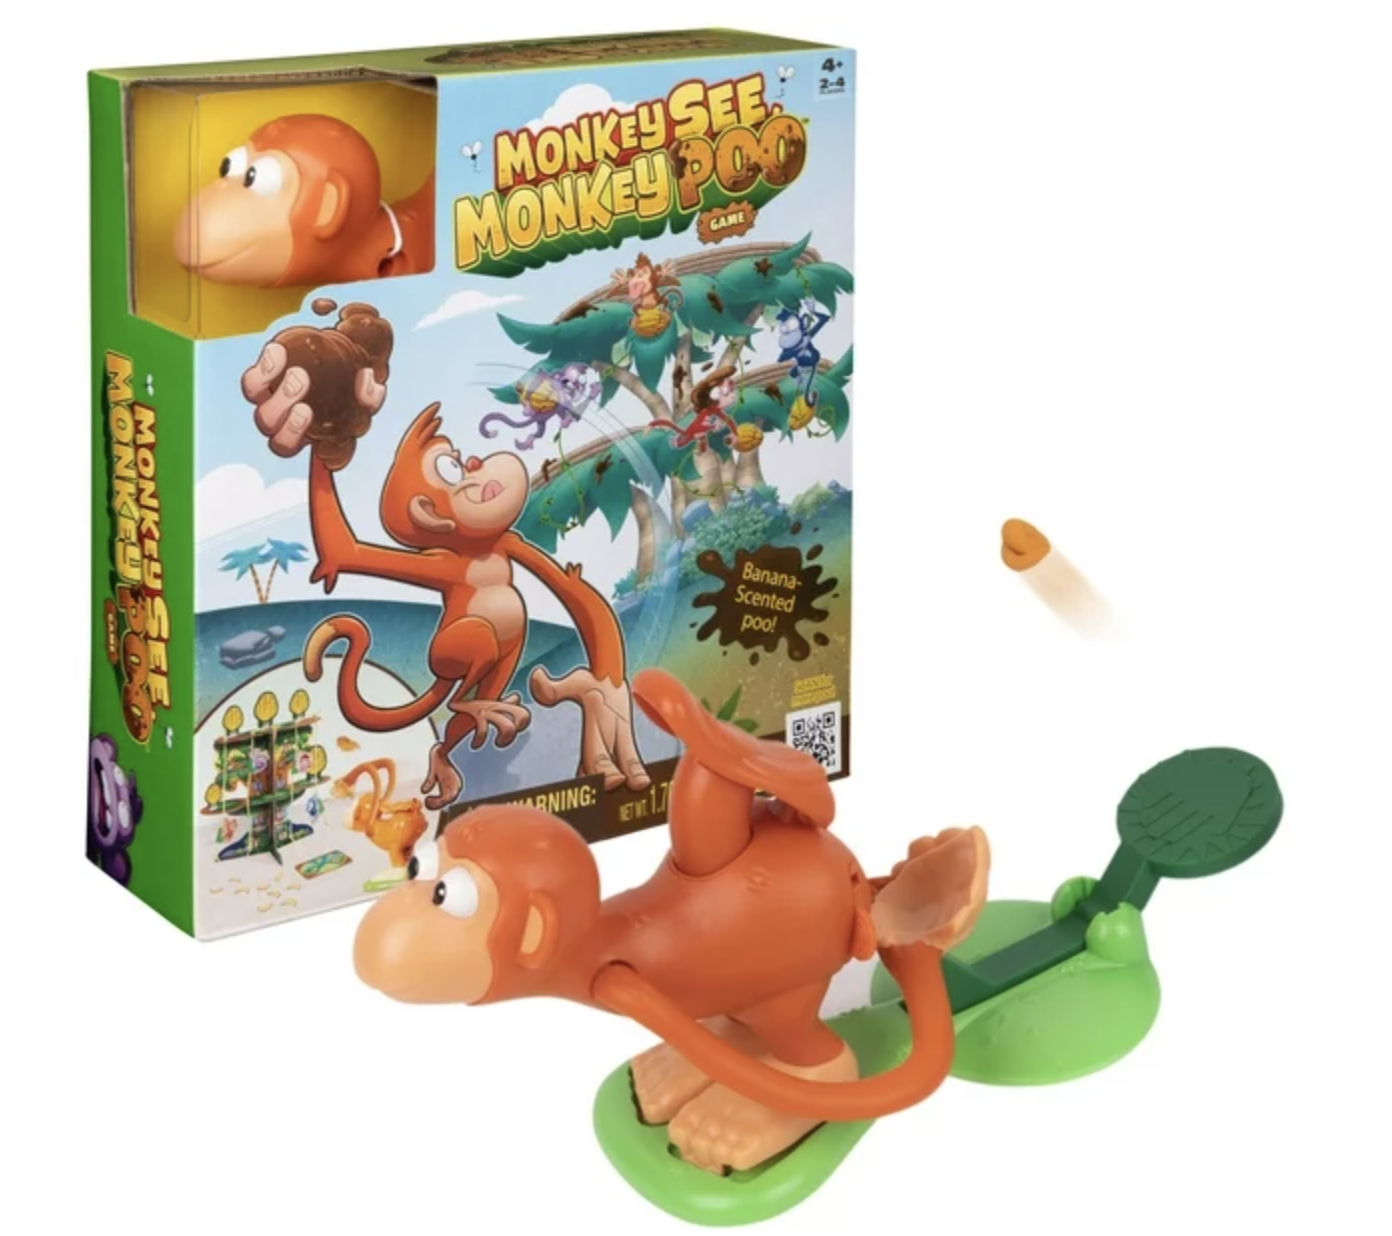 Monkey toy game for kids